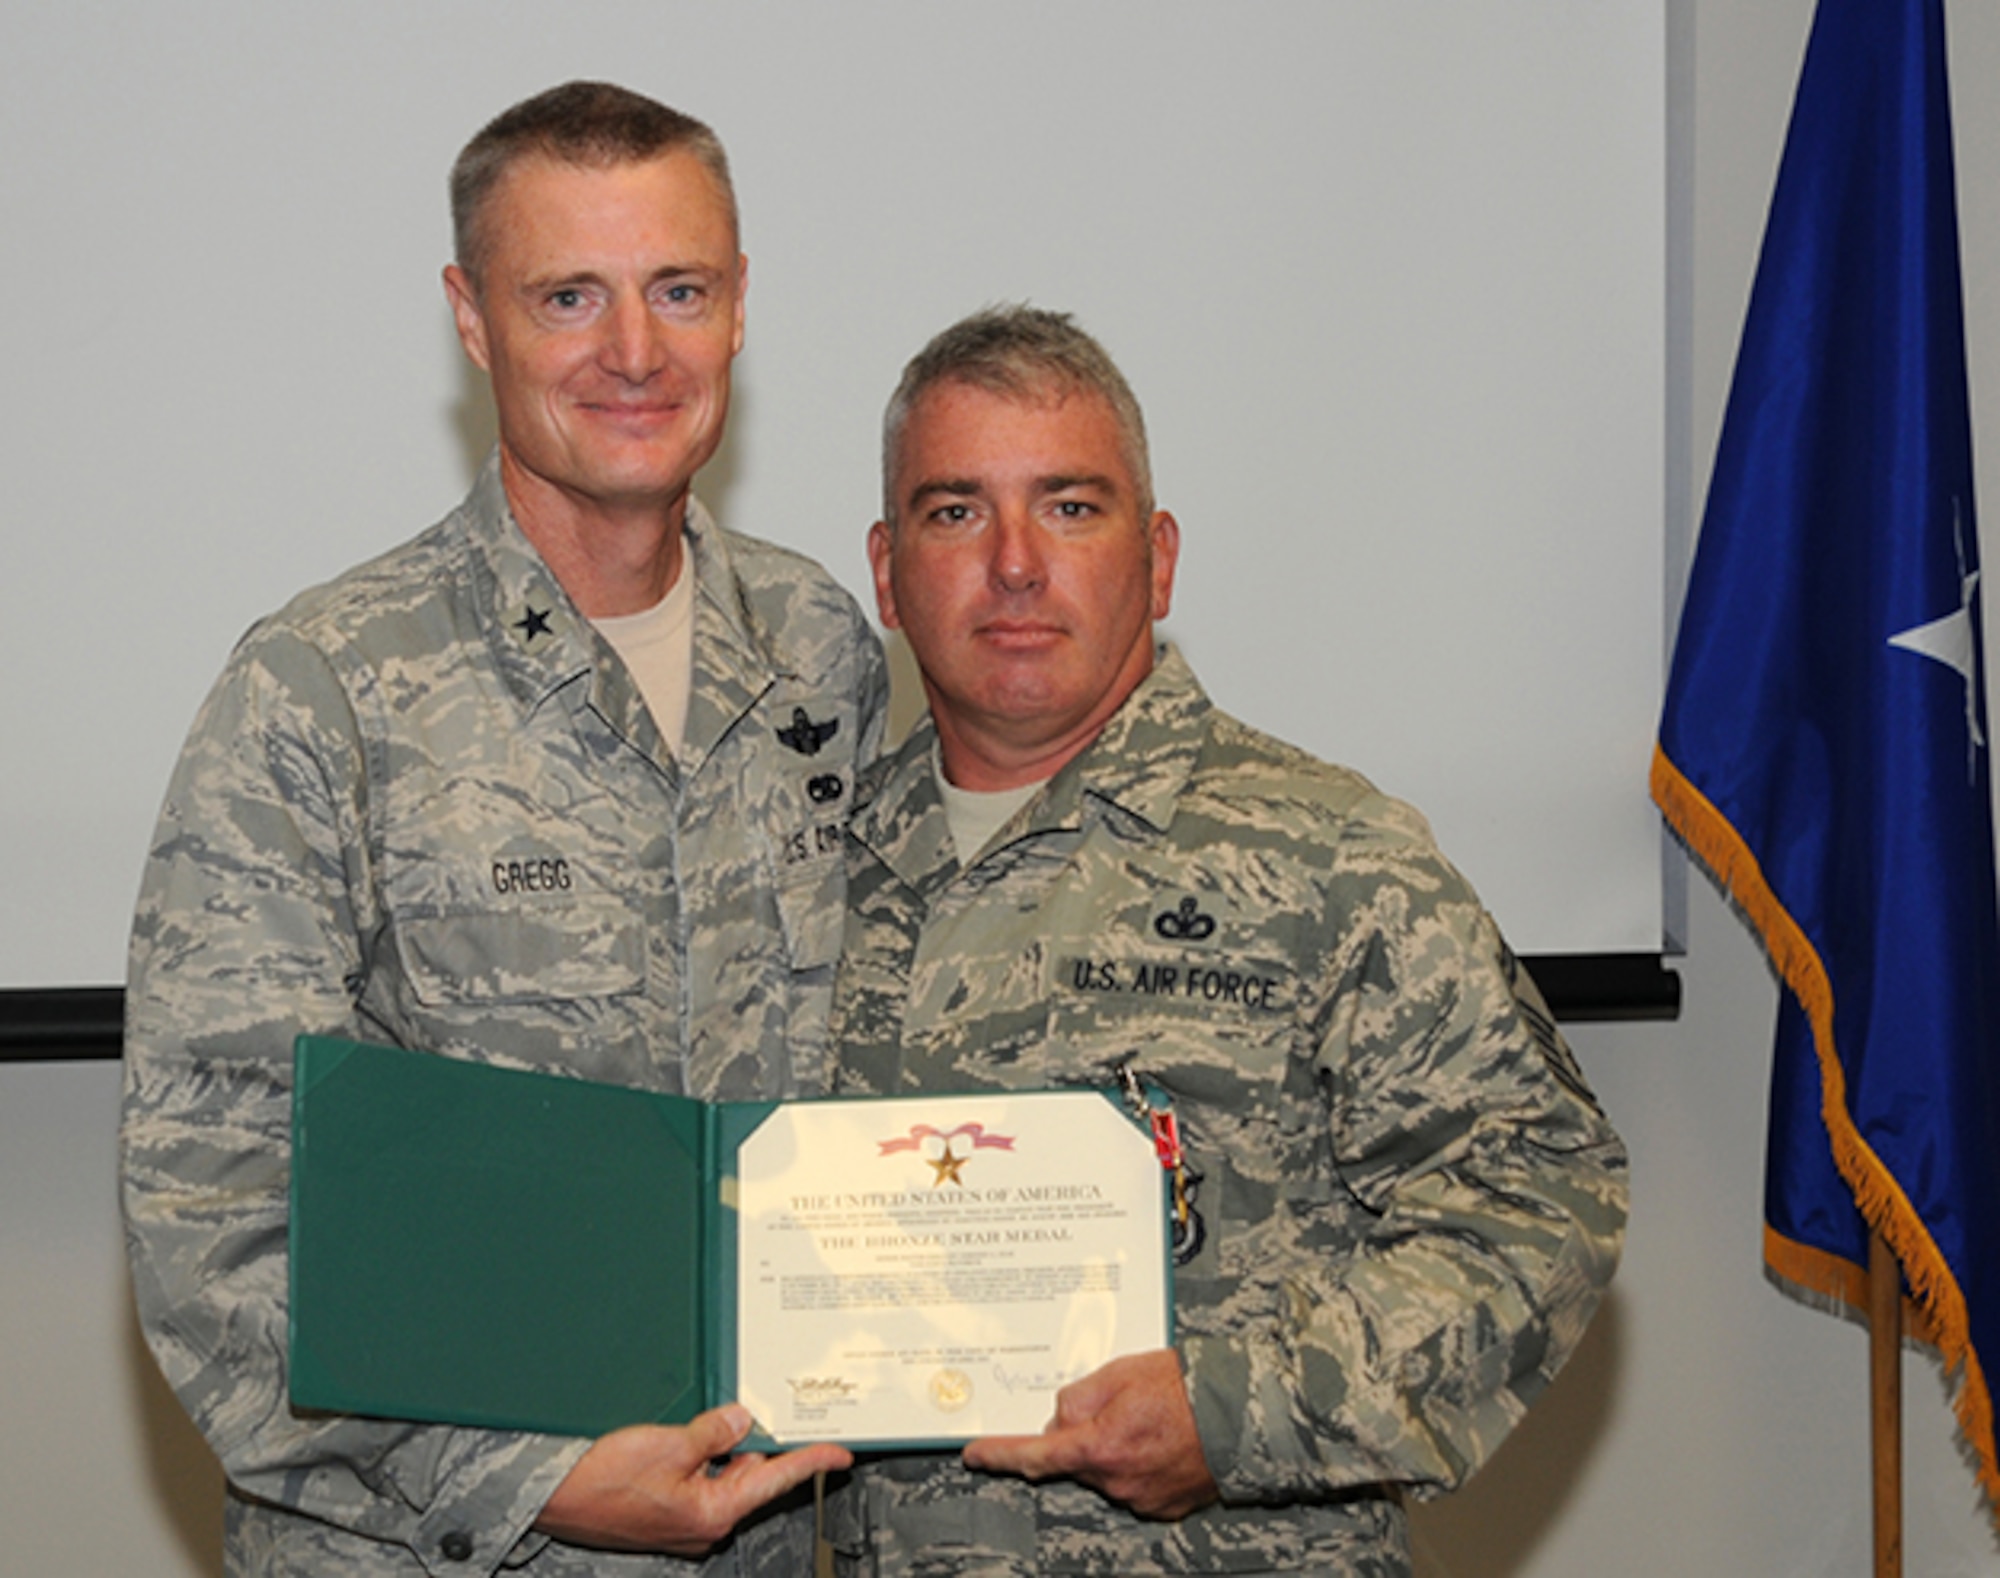 Brig. Gen. Steven Gregg, Commander of the Oregon Air National Guard, presents the Bronze Star to Senior Master Sergeant Timothy Lear, 142nd Security Forces Squadron, on Aug. 3, 2012.  Lear received the medal for “extraordinary leadership” while being assigned to the 966th Air Expeditionary Squadron, Baghram Air Base, Afghanistan.  (U.S. Air Force Photograph by Master Sgt. Shelly Ball, 142nd Fighter Wing Public Affairs)